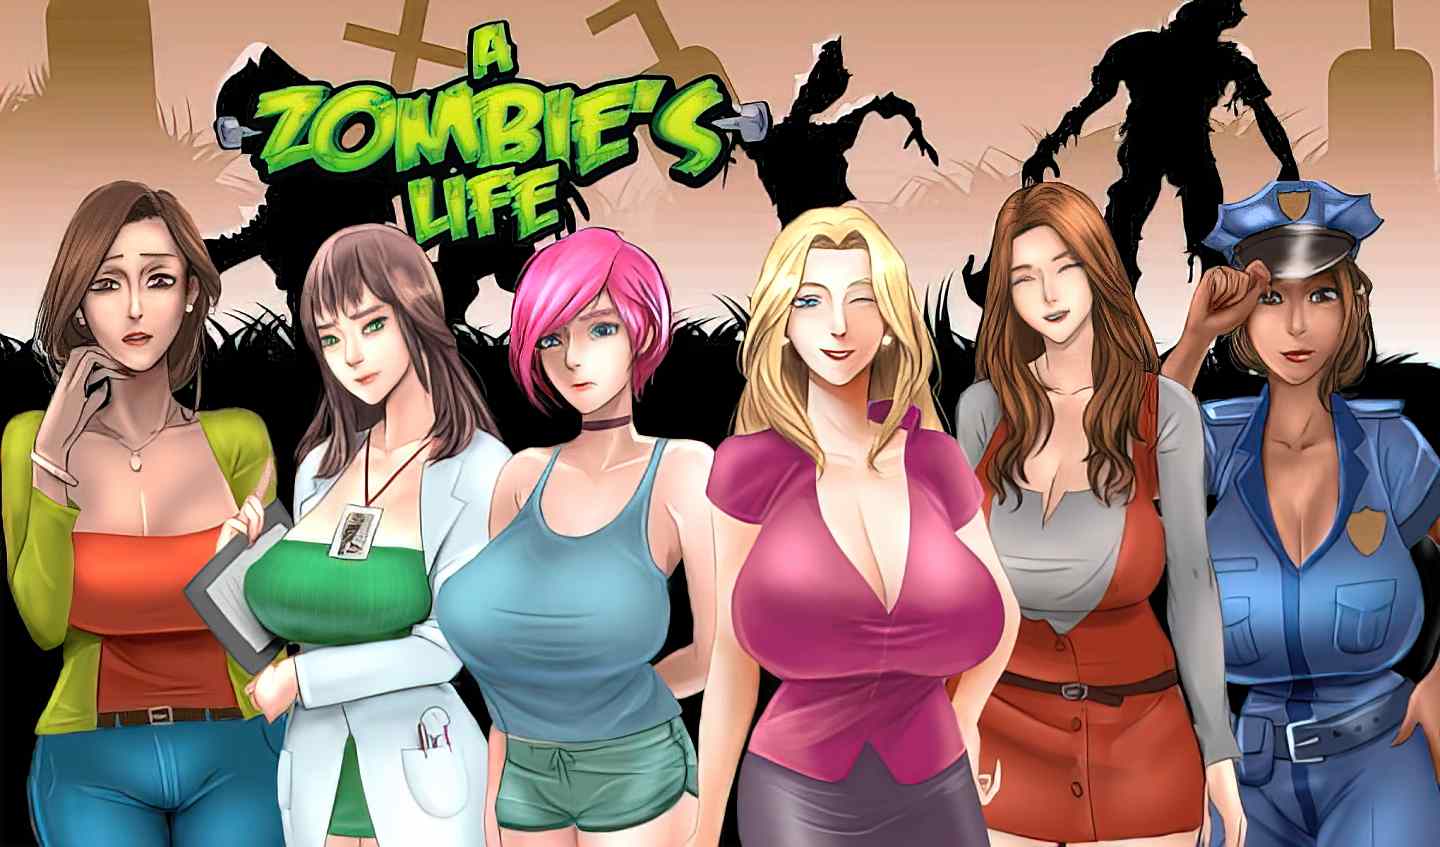 A zombie's life porn game